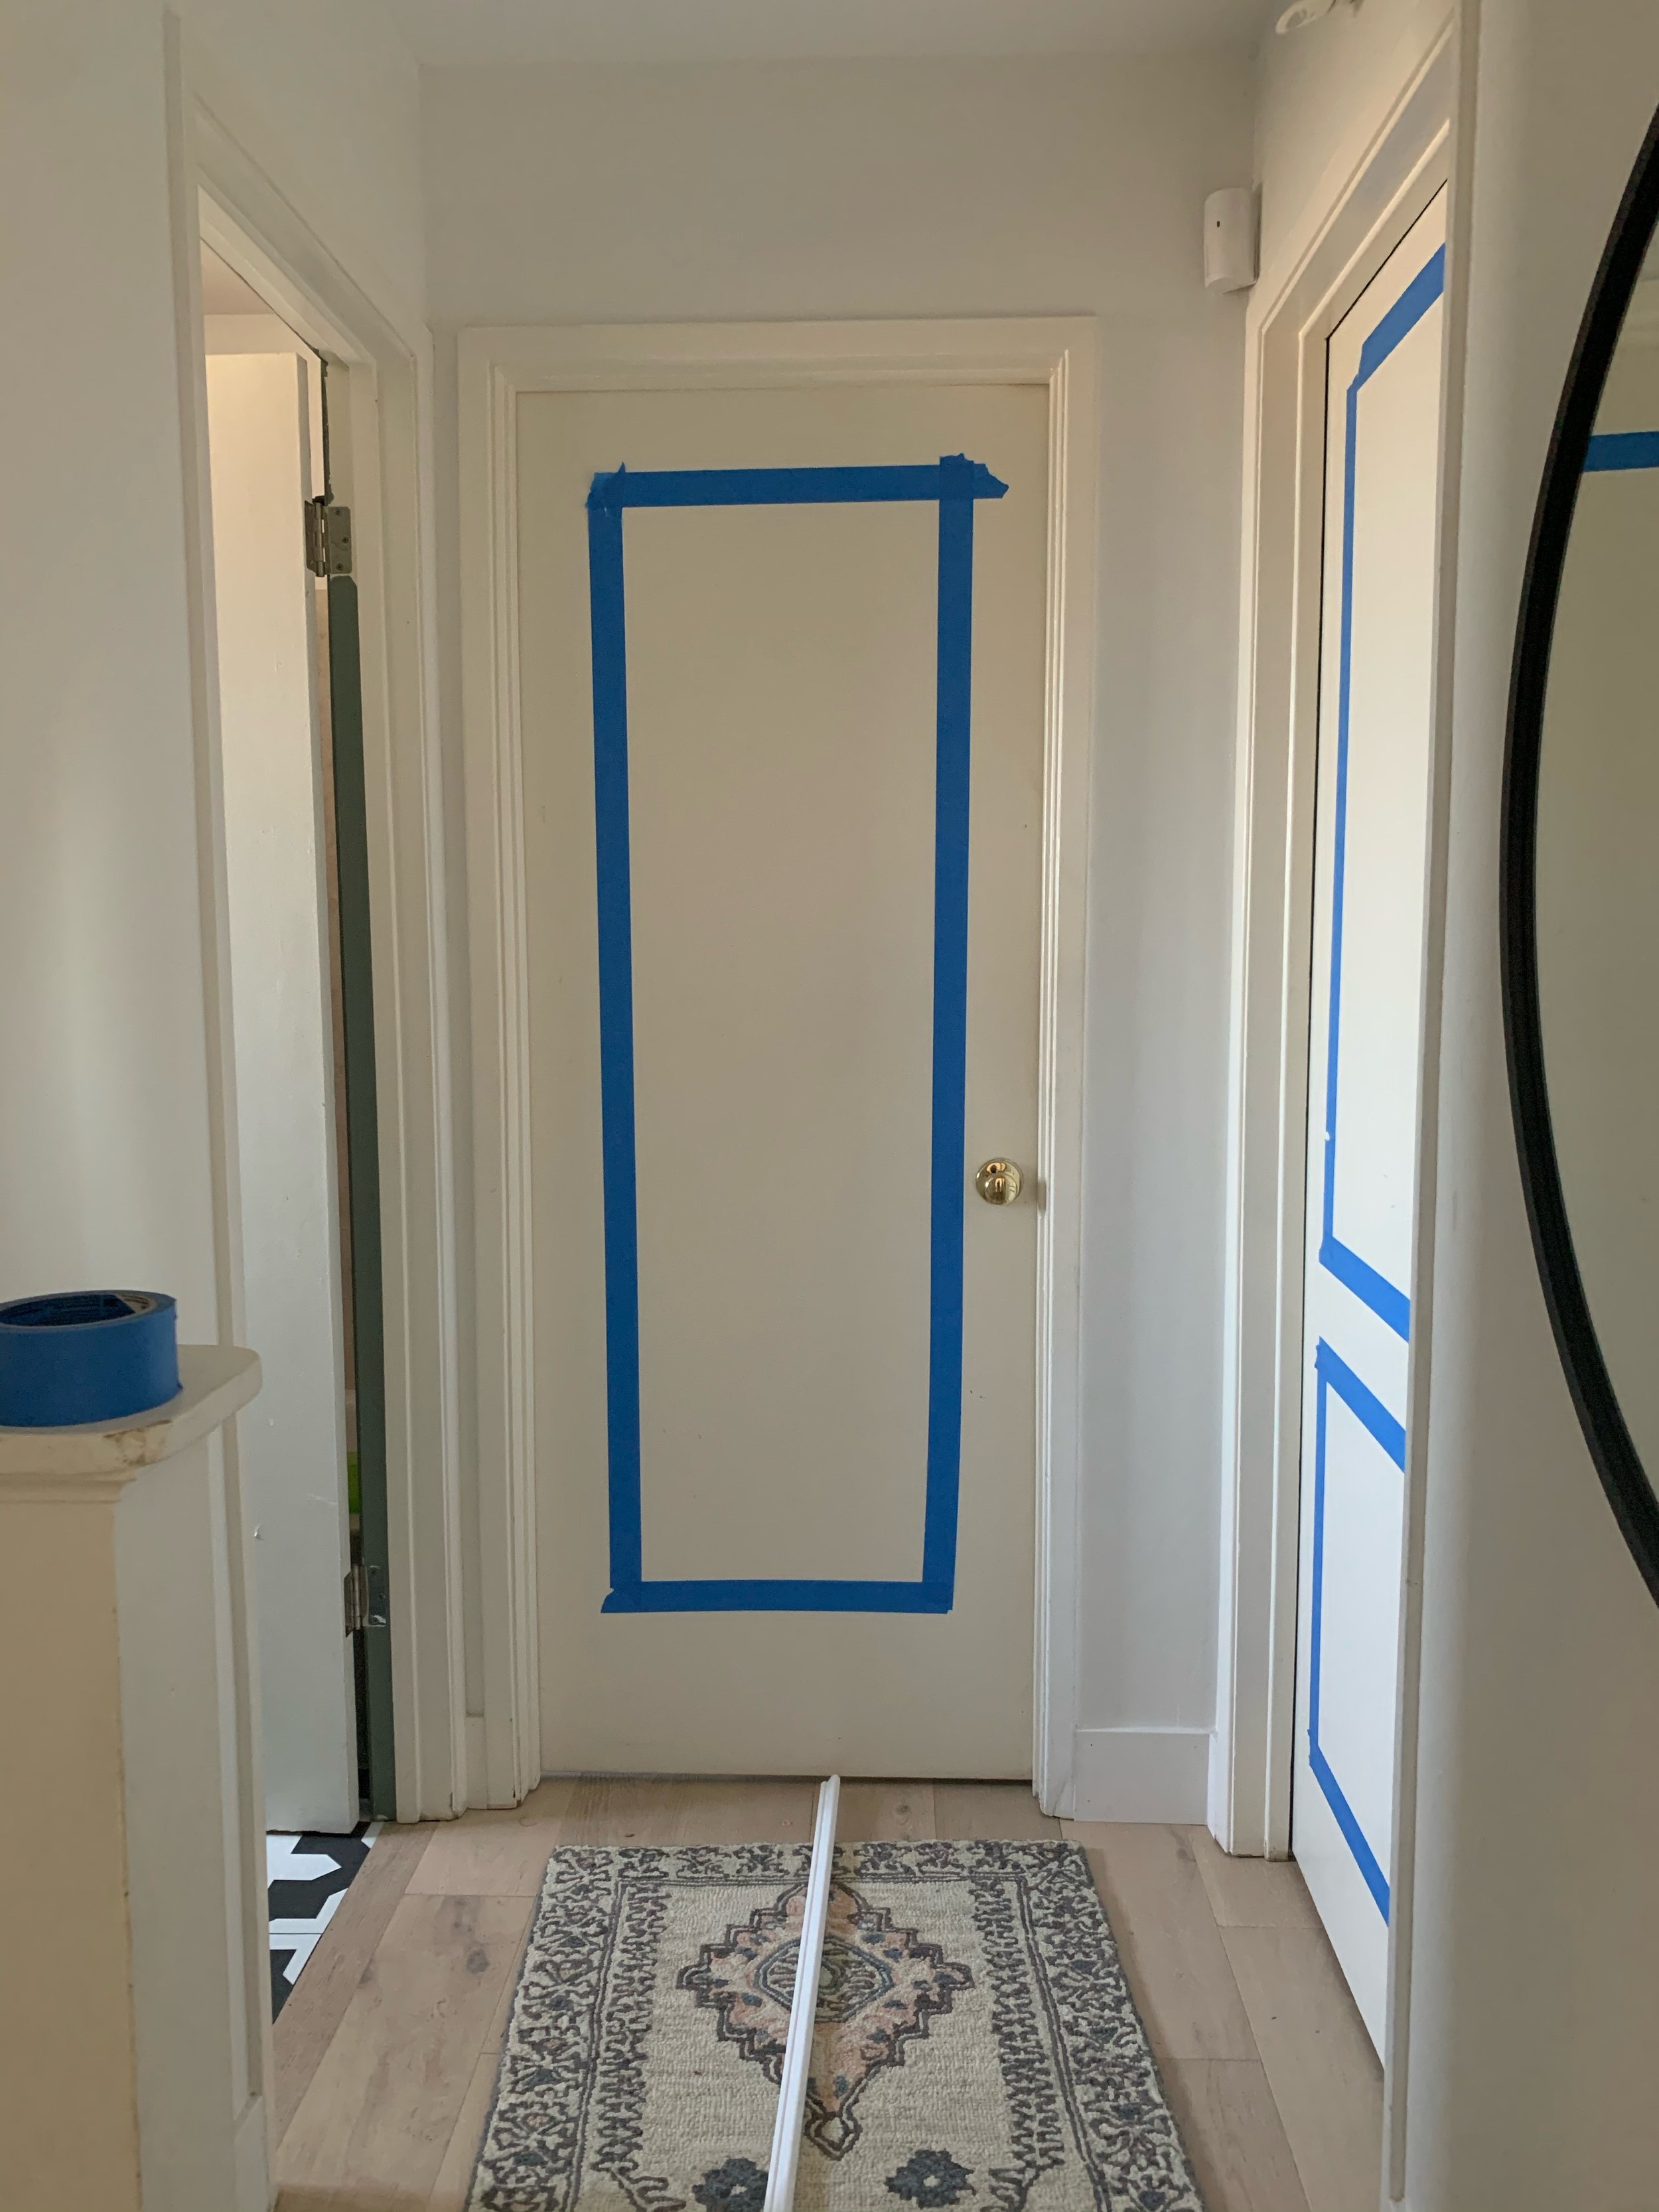 Thrifty Artsy Girl: From Hollow Core Bore to a Beautiful Updated Door: DIY  Slab Door Makeover using Trim and Paint